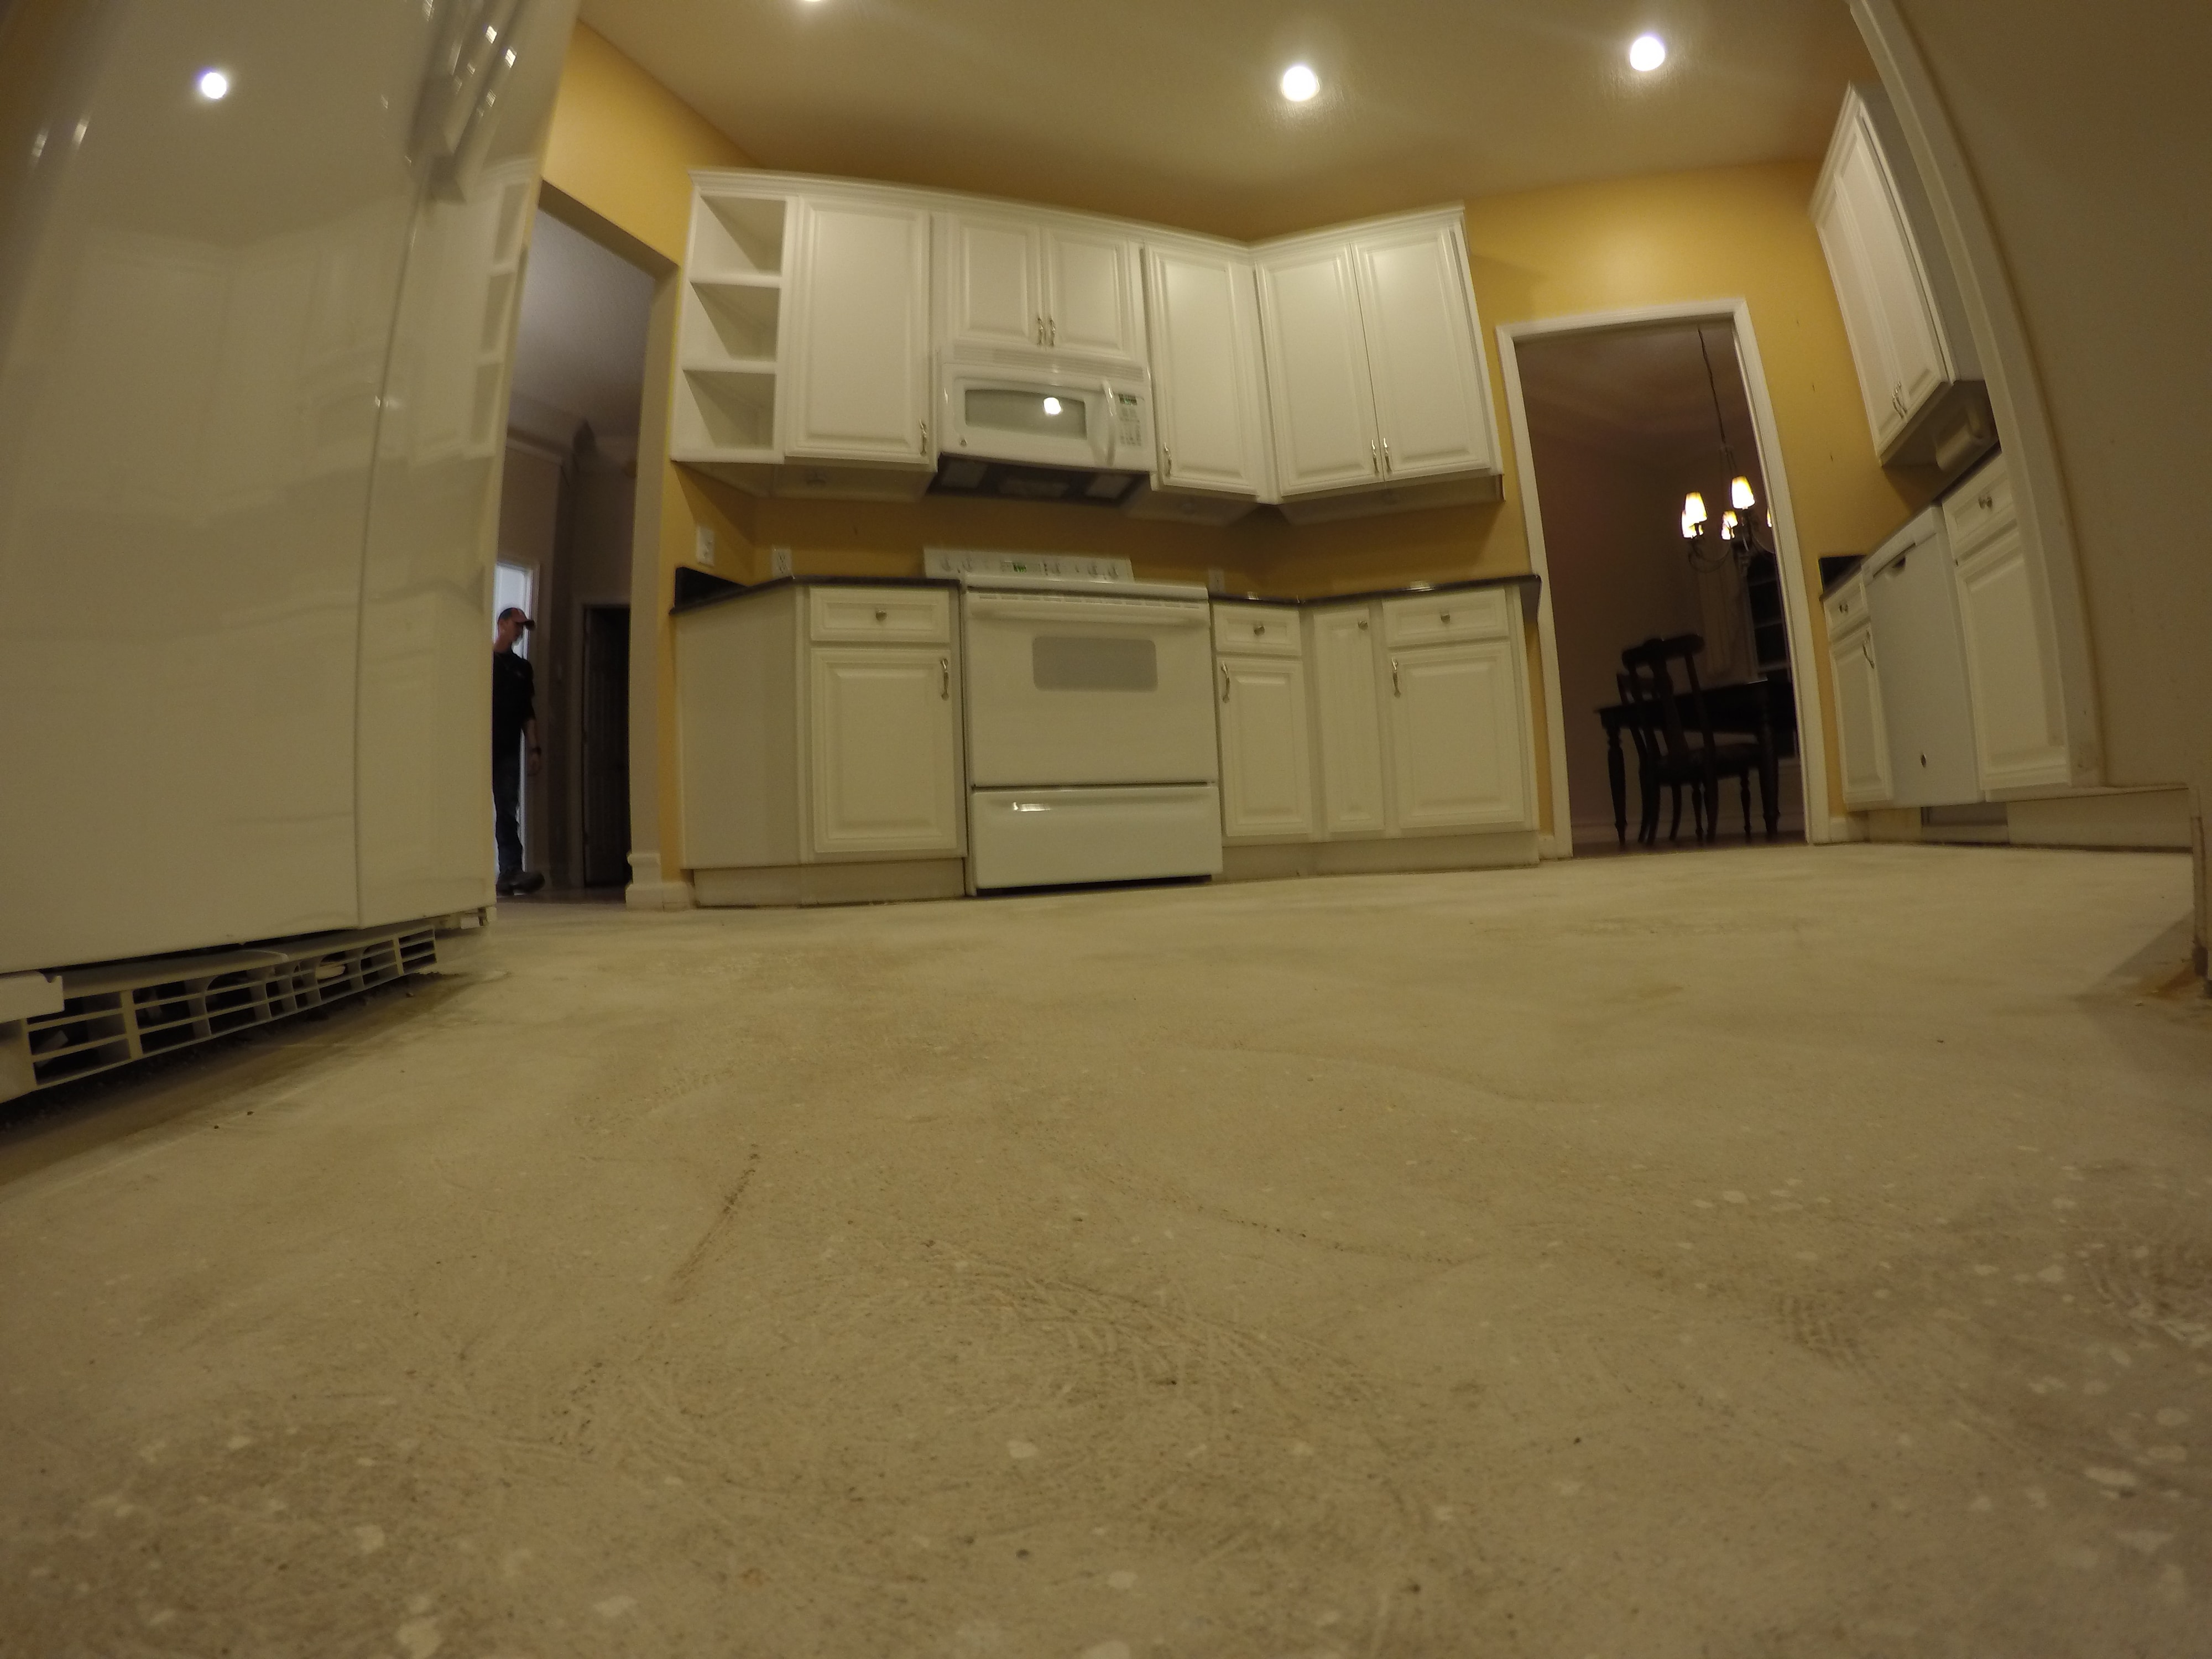 Image of a clean kitchen sub-floor after tile floor removal